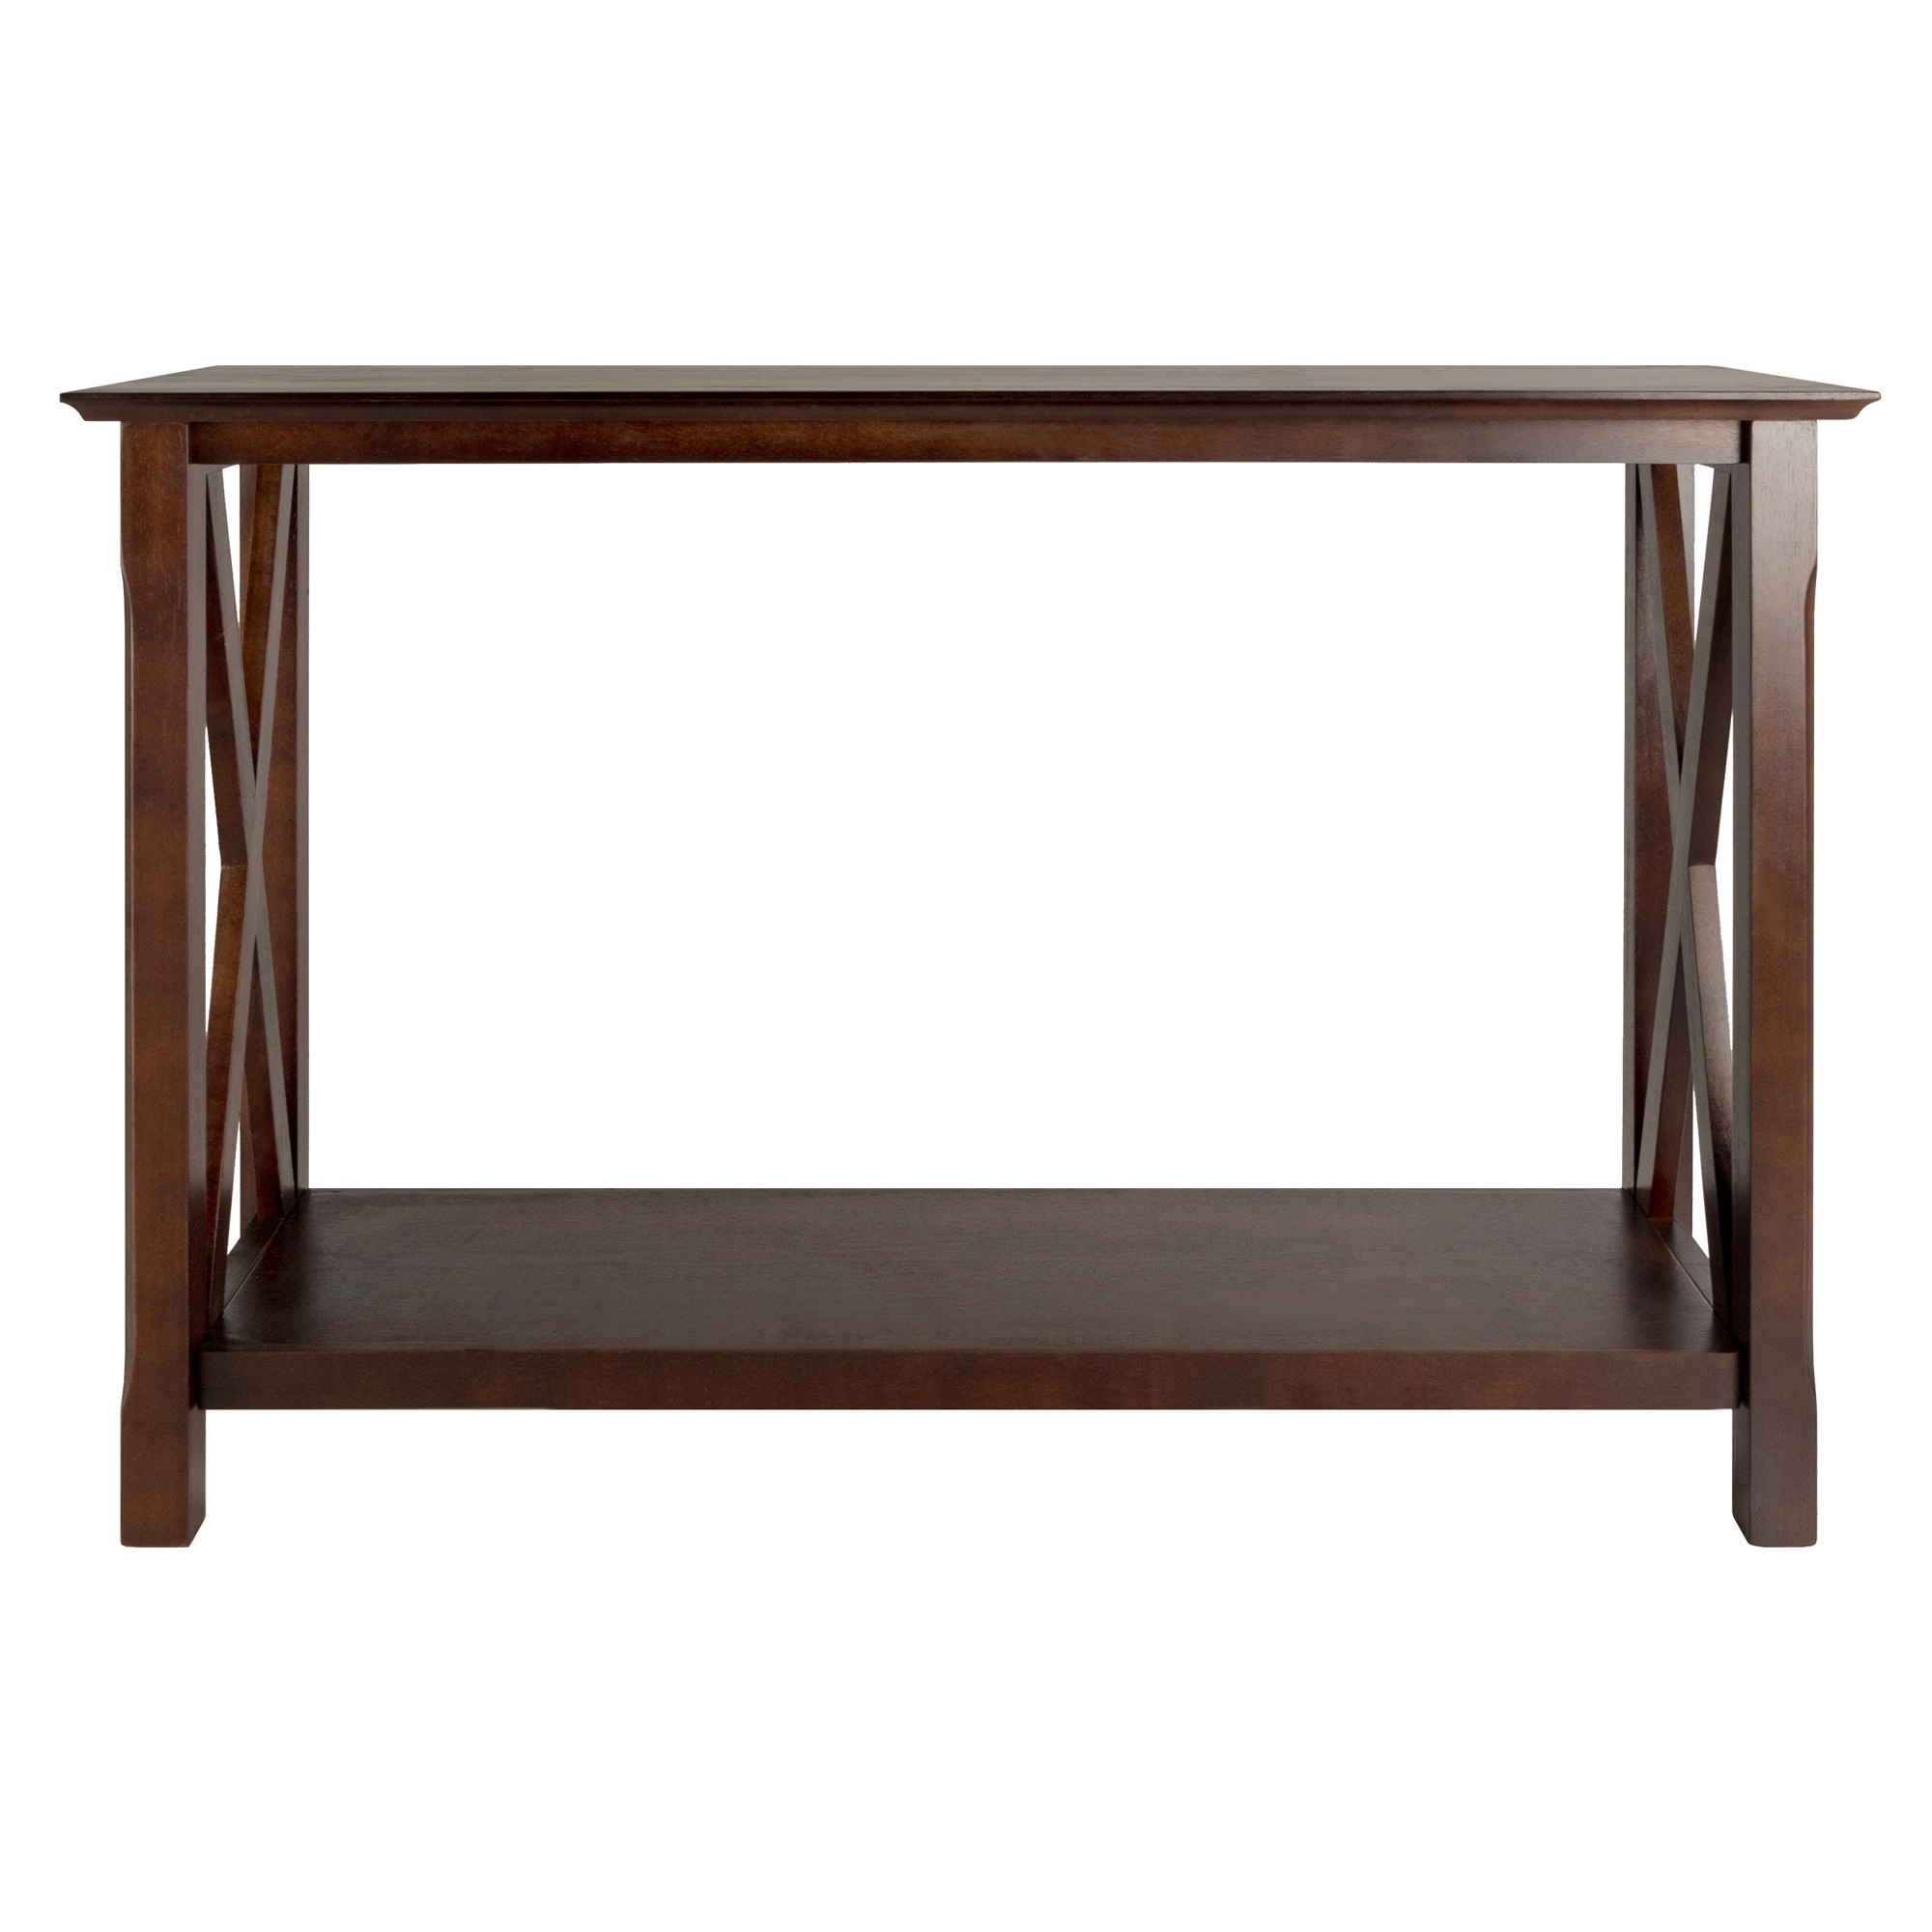 Winsome Wood Xola X-Panel Console Table, Cappuccino Finish - image 3 of 5